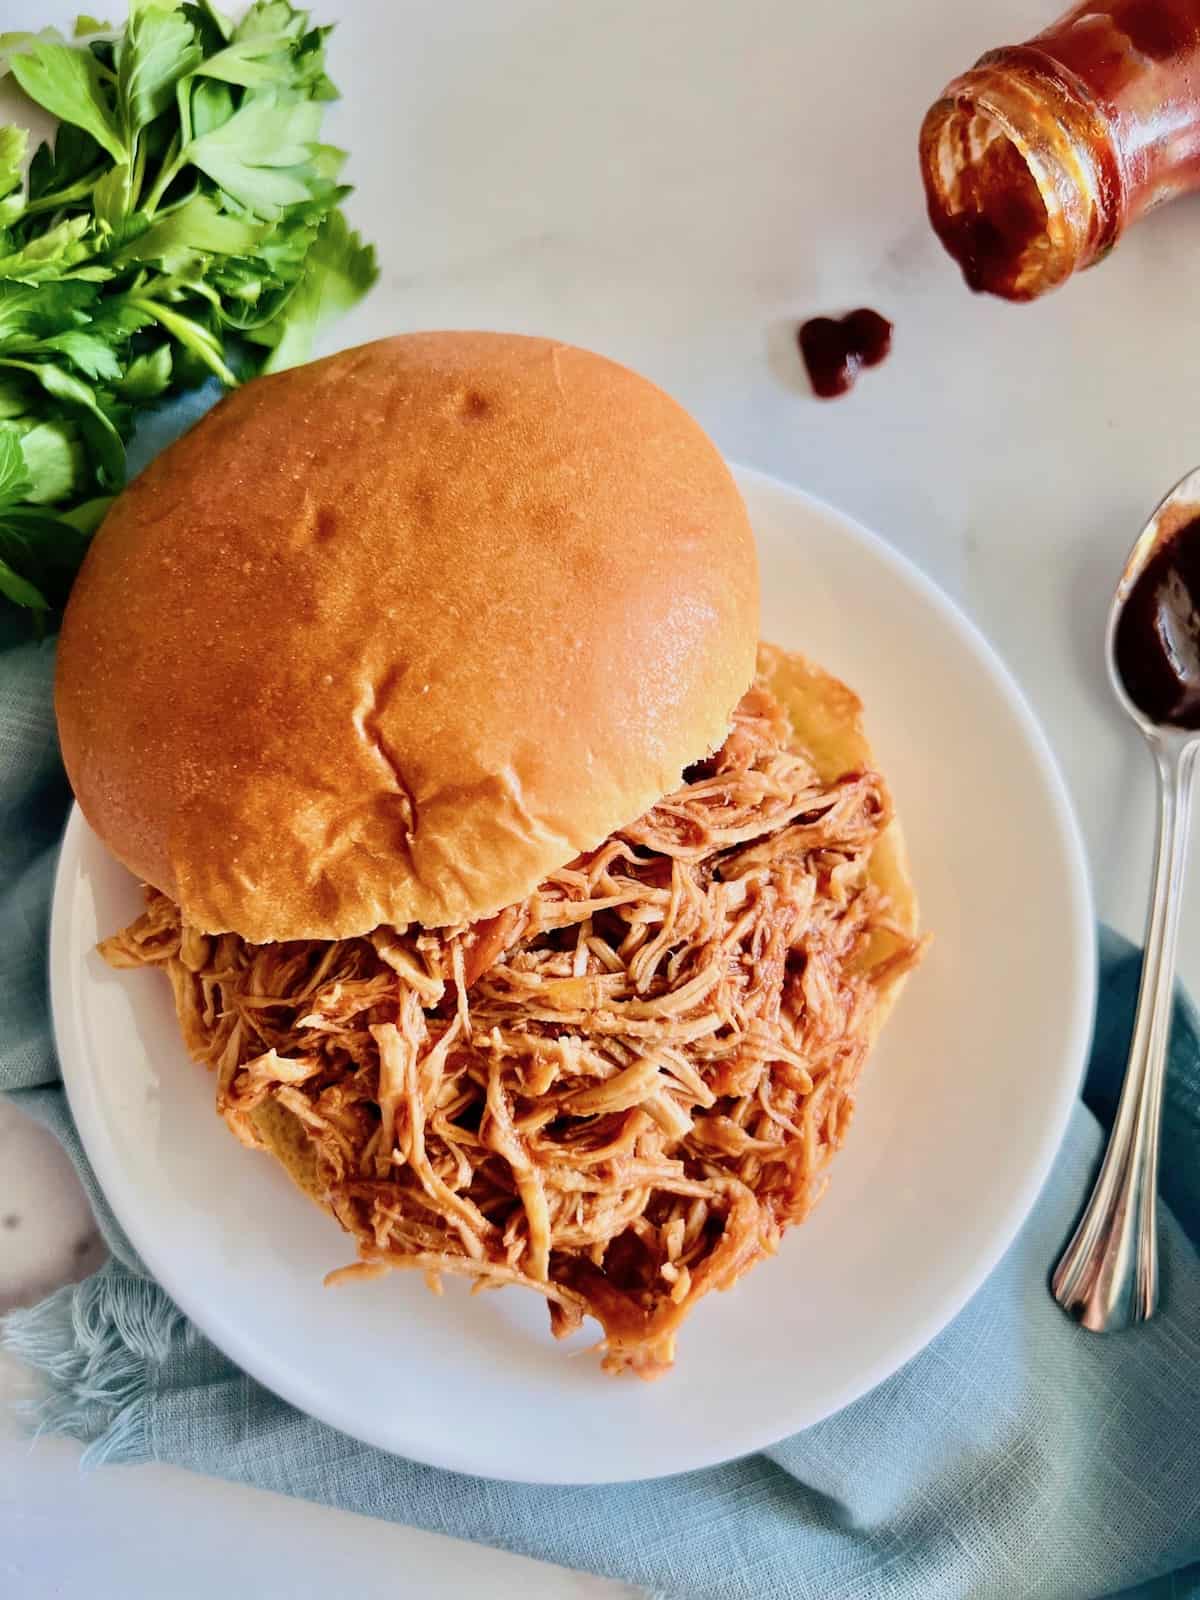 Slow Cooker BBQ Pulled Chicken On a bun with parsley and bbq sauce on the side with blue napkin.